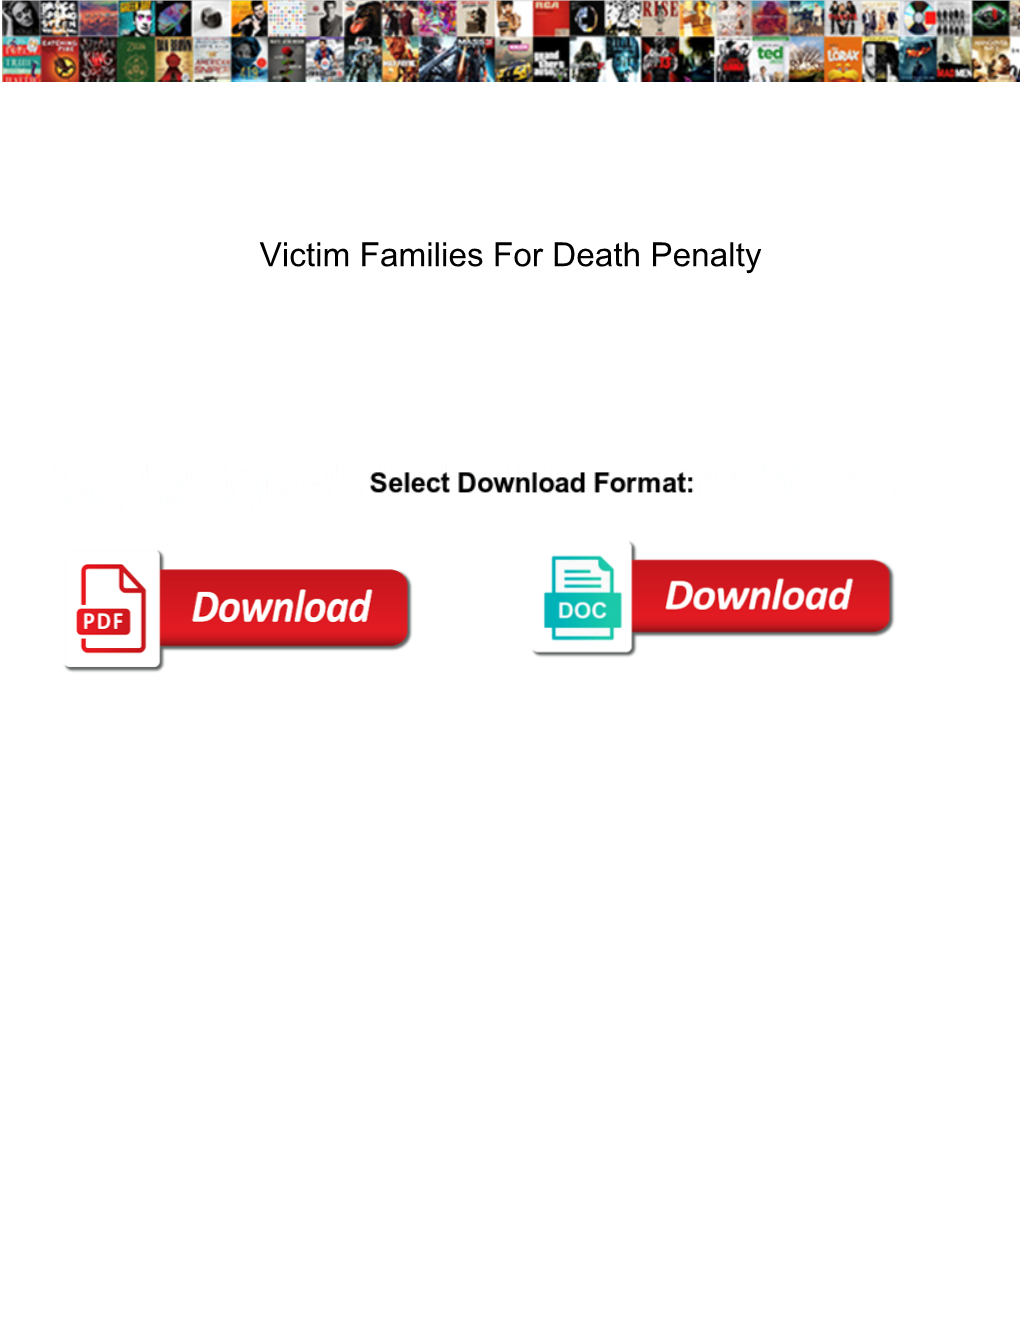 Victim Families for Death Penalty